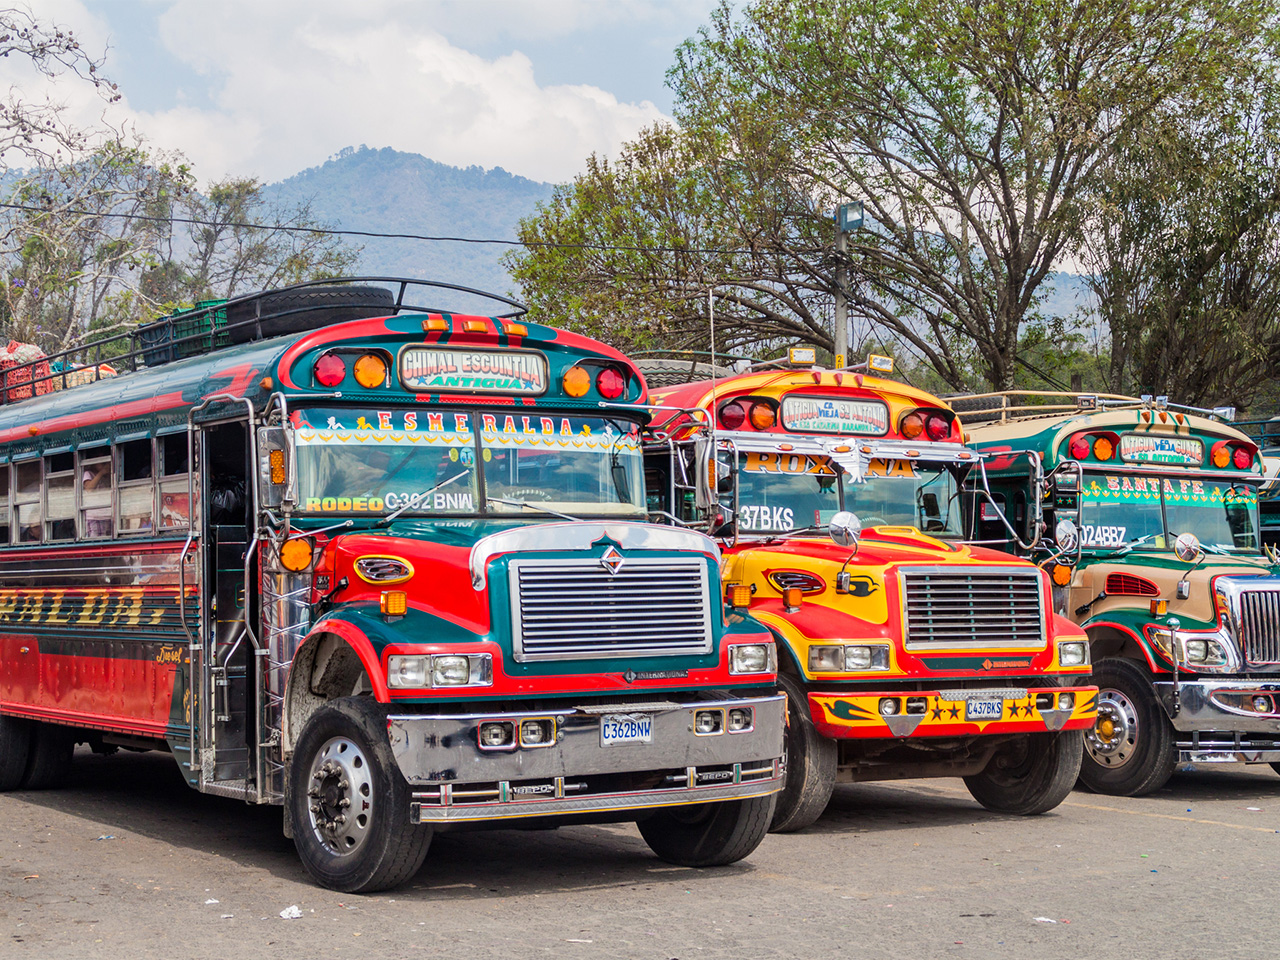 A row of colorful chicken buses in Antigua, Guatemala.